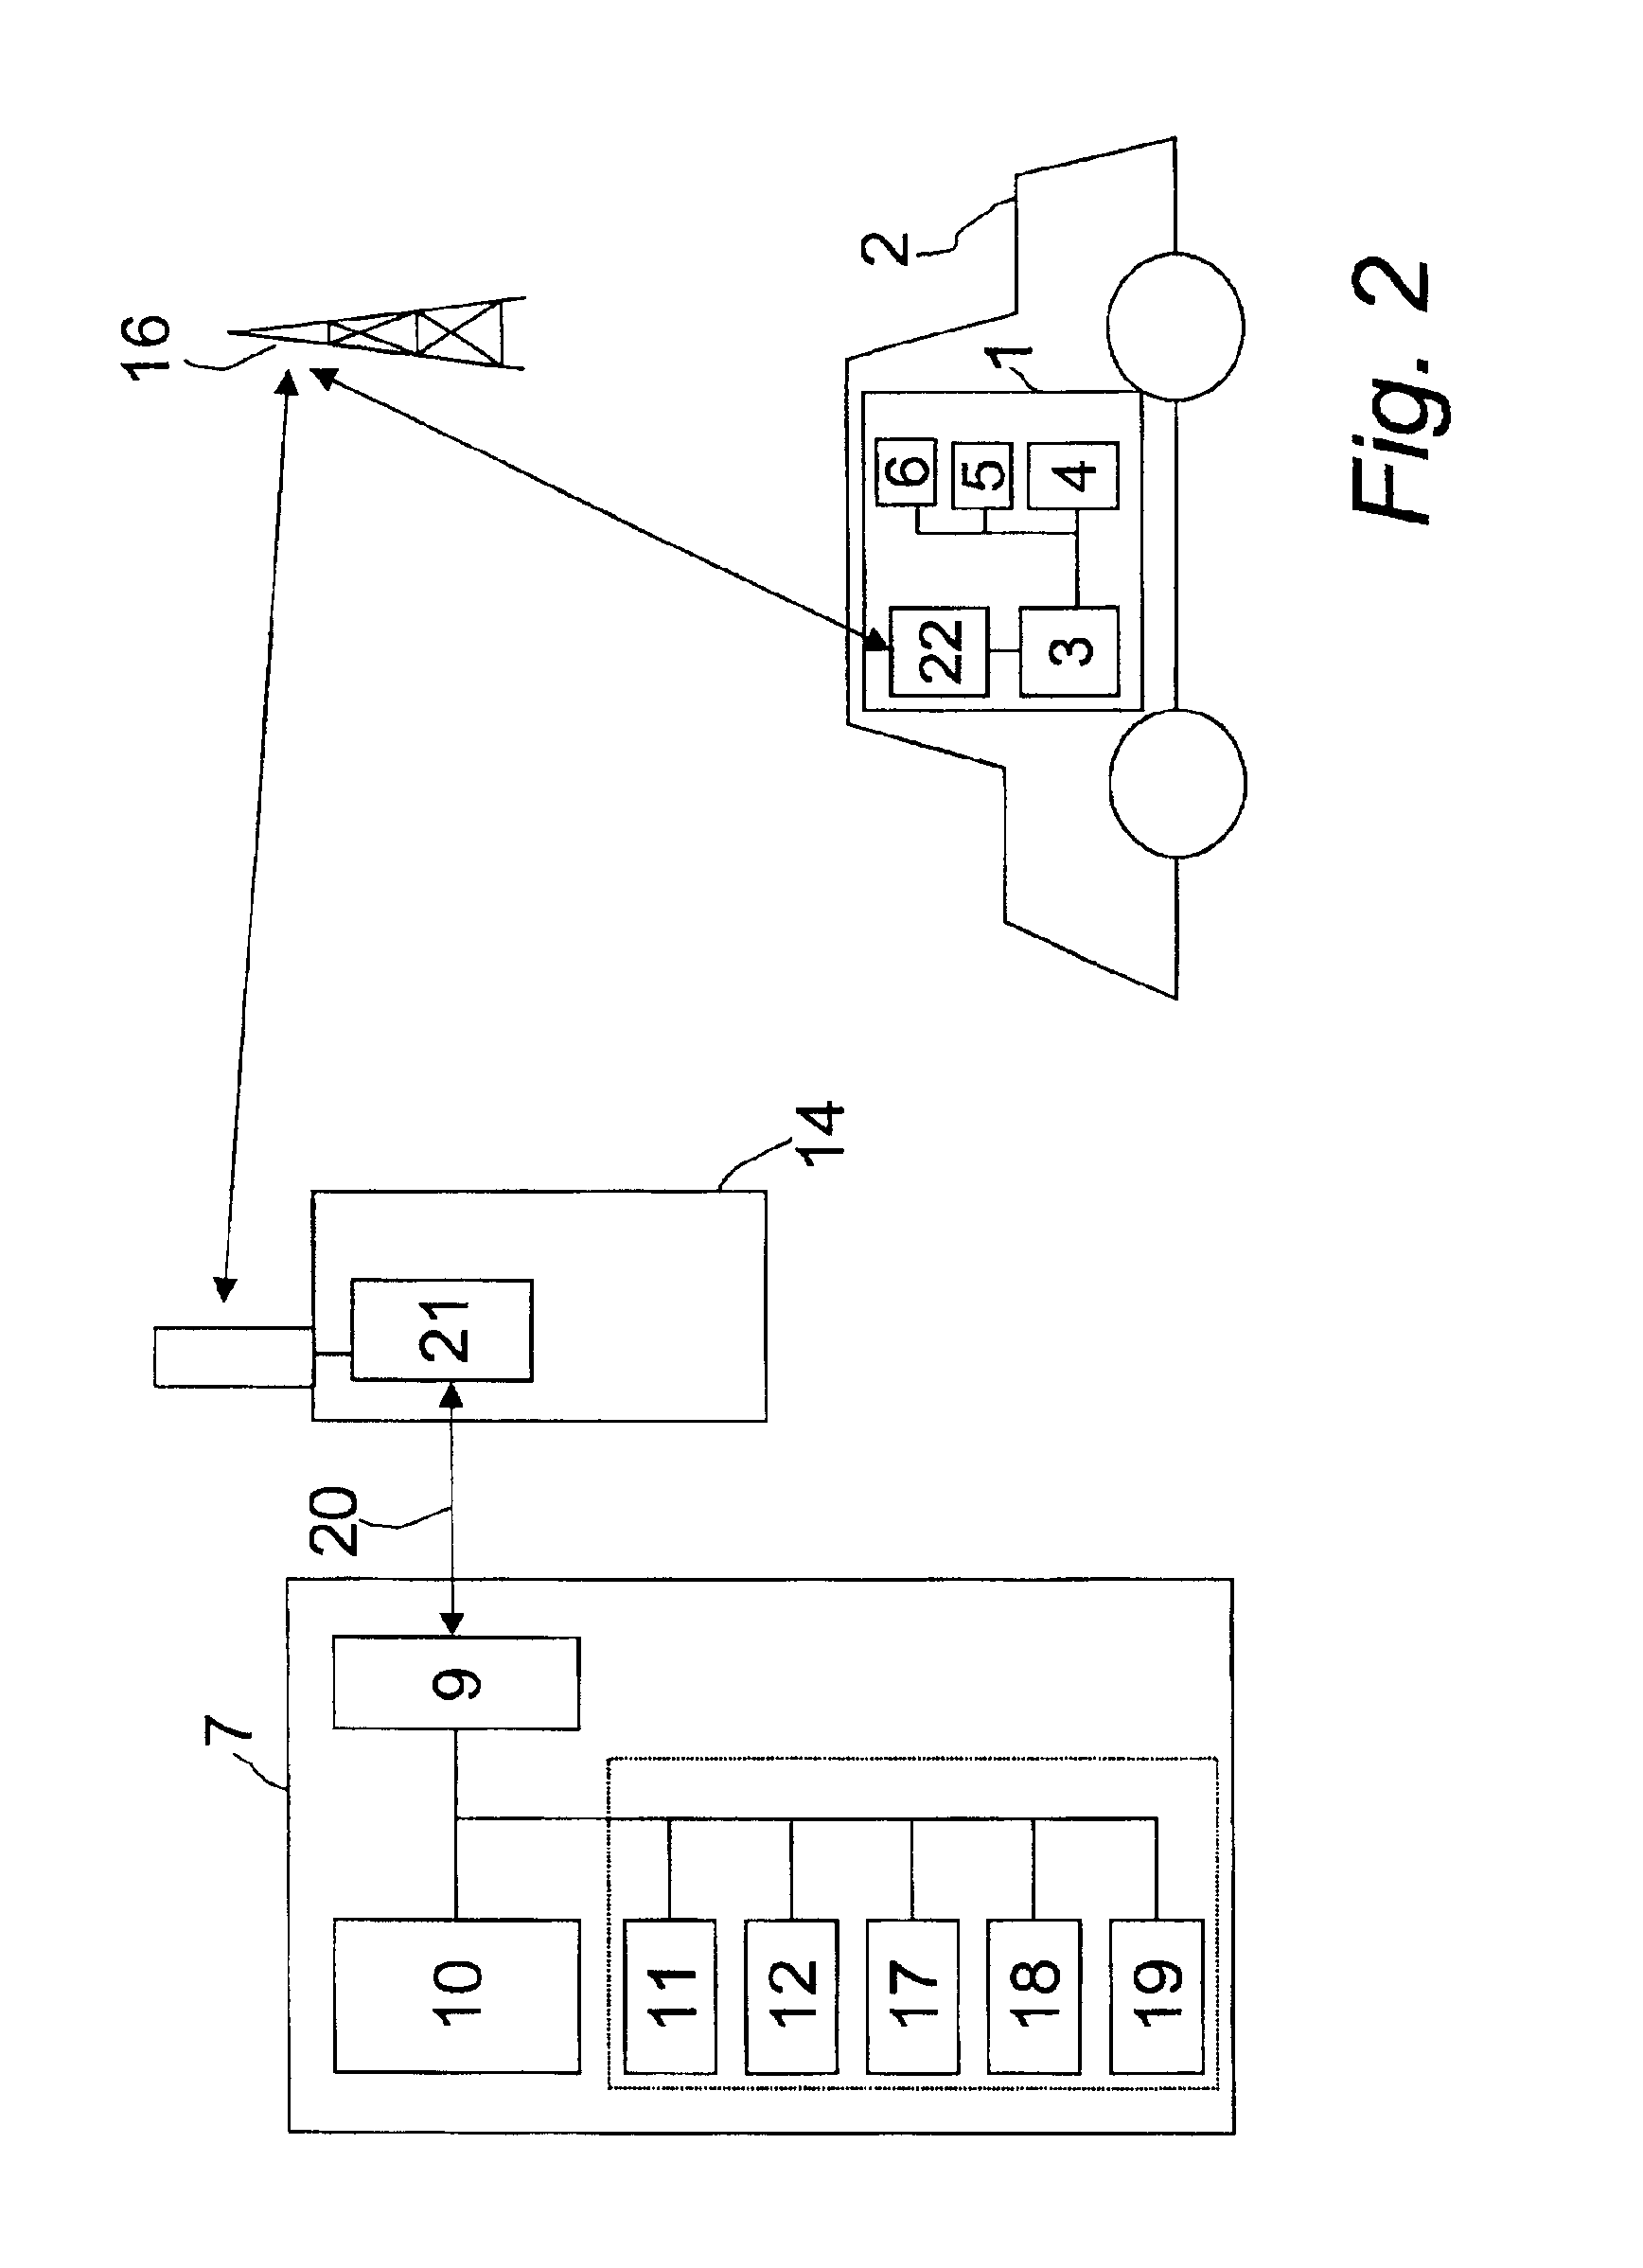 Remote communication system for use with a vehicle